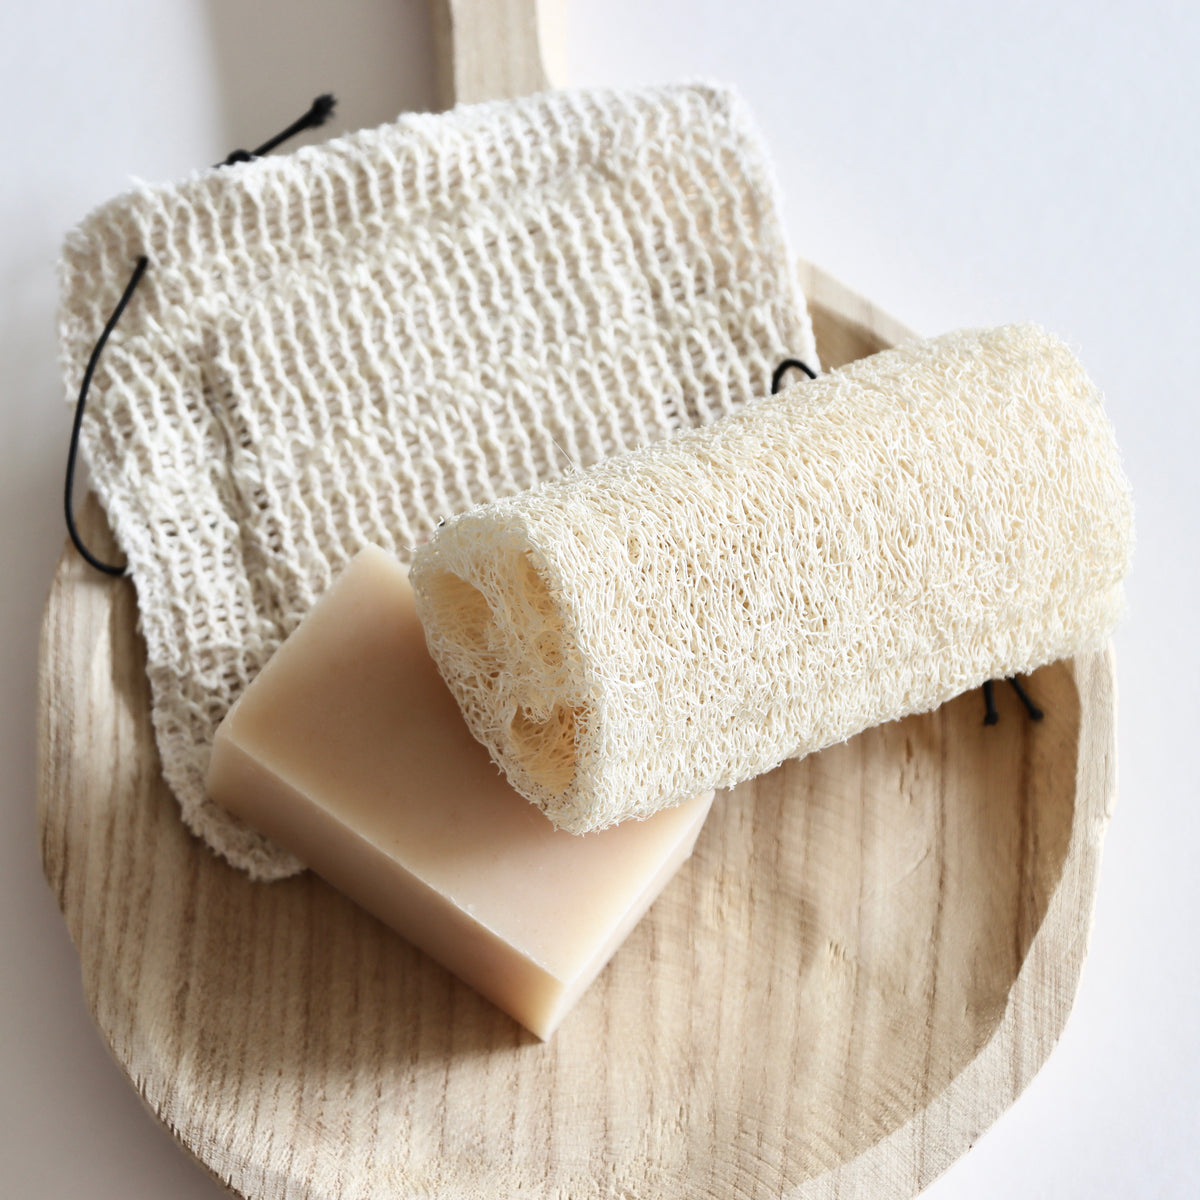 Natural Sisal Cellulose Cleaning Scrubber Sponge